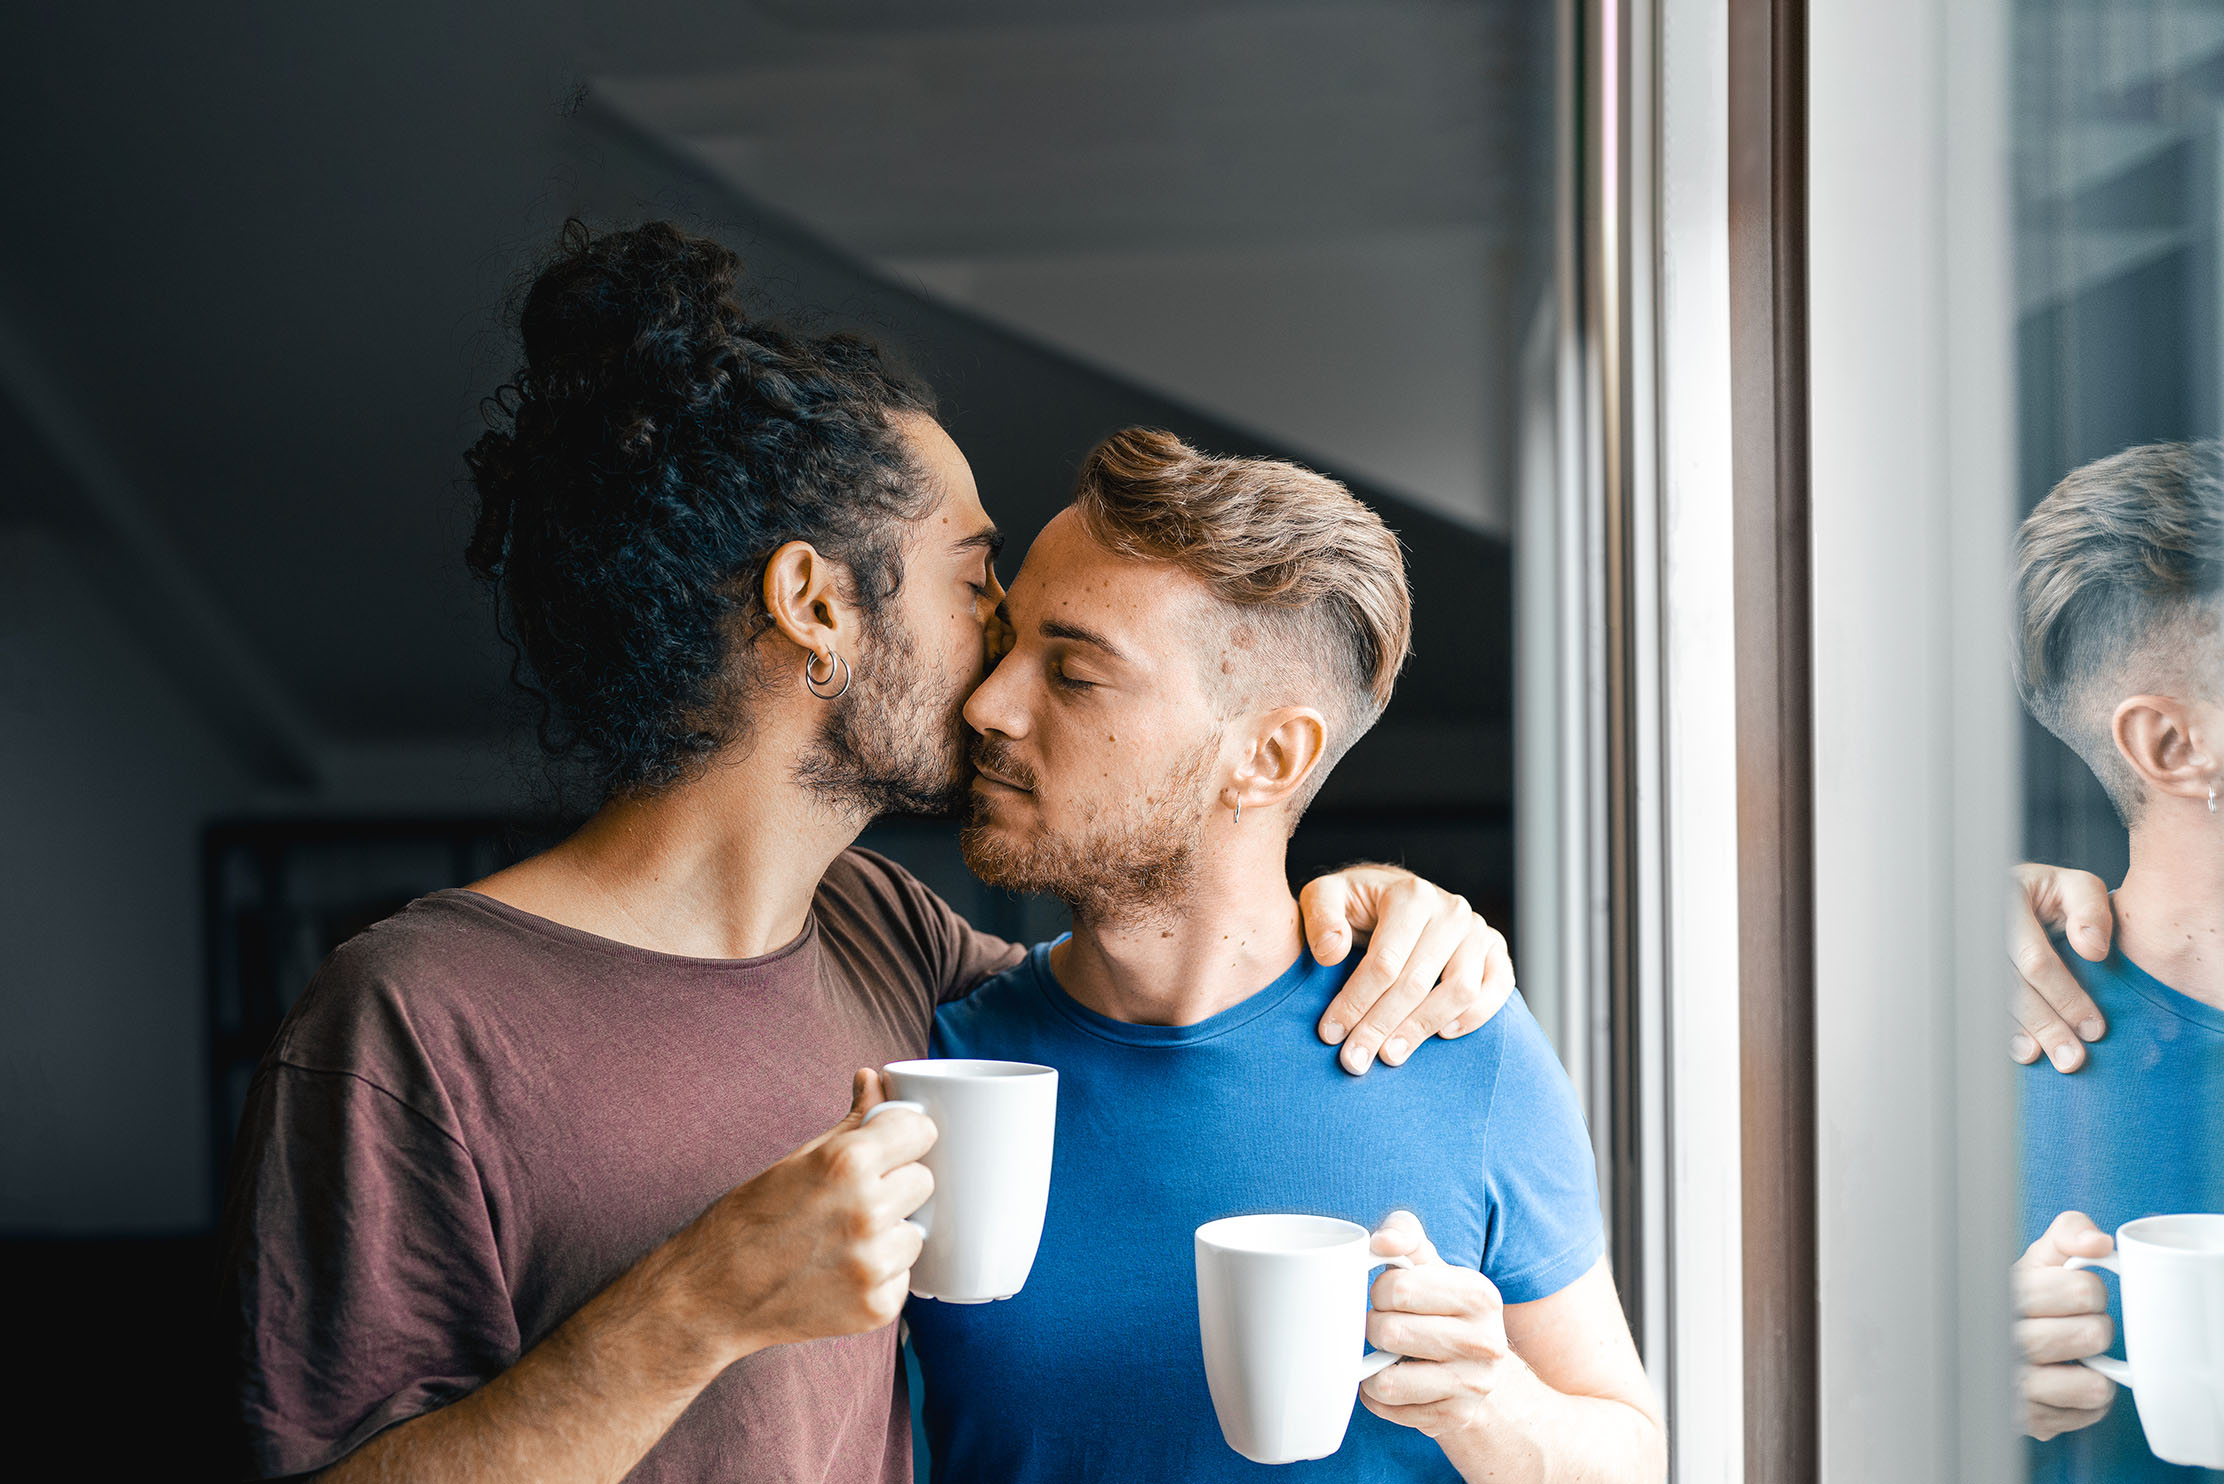 A couple enjoy a kiss on the cheek whilst holding mugs